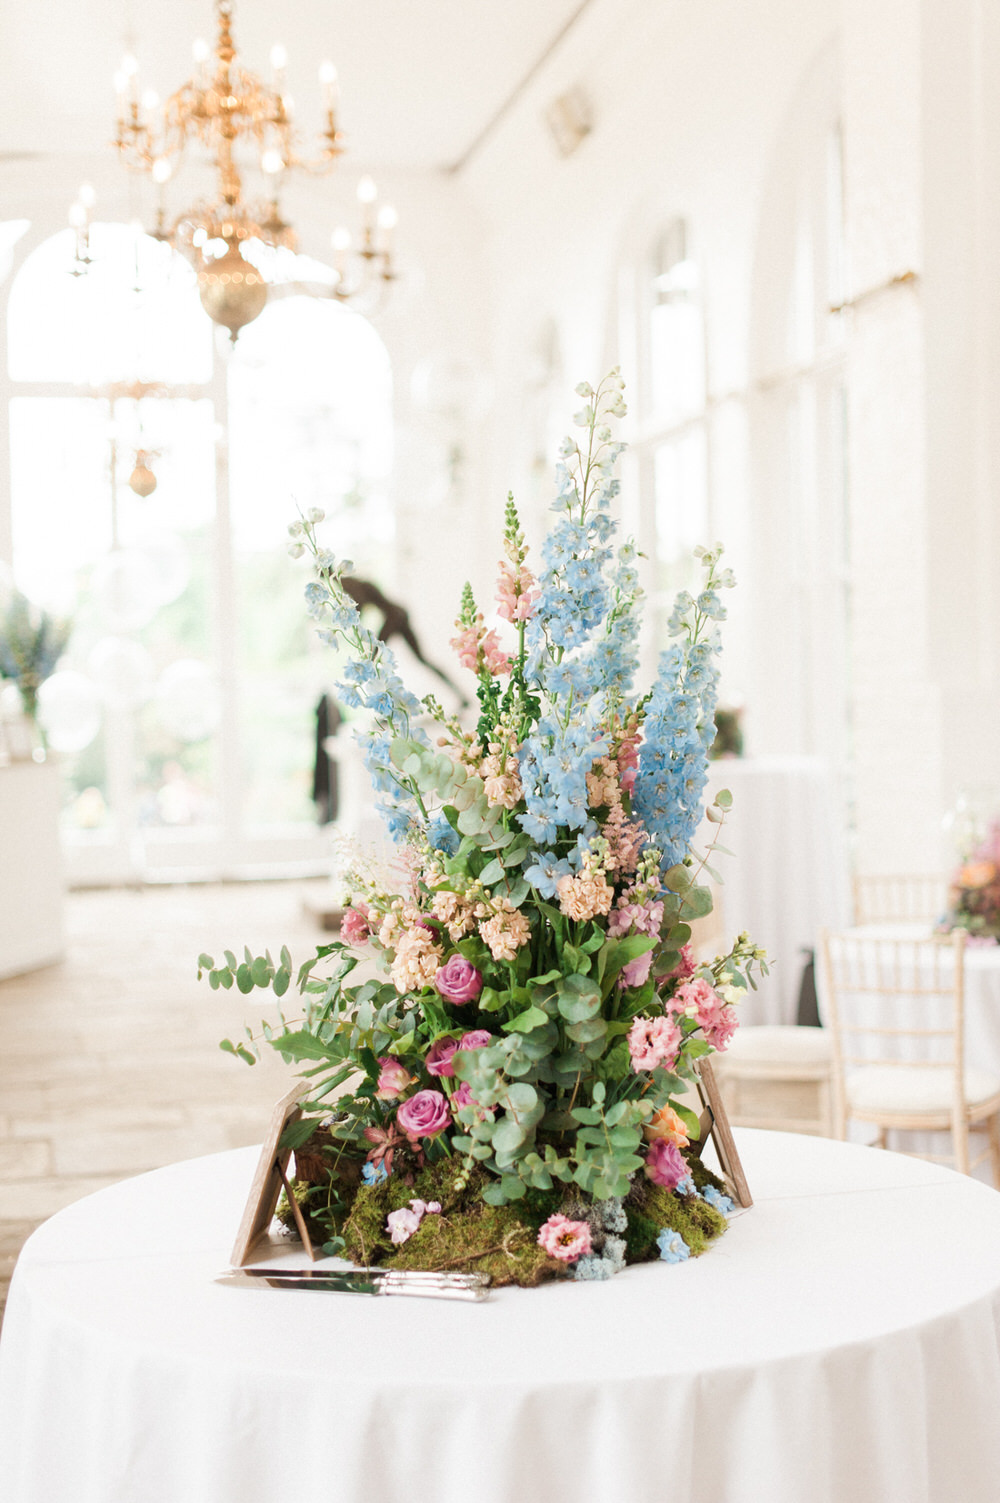 Floral centrepieces | | Purple, blue and peace flowers | Wildflower centrepiece | Summer florals | Childrens Party | A Midsummer nights dream inspired children's birthday party with stunning floral, fairy entertainment, crafts and a picnic. Photos by Kate Nielen.